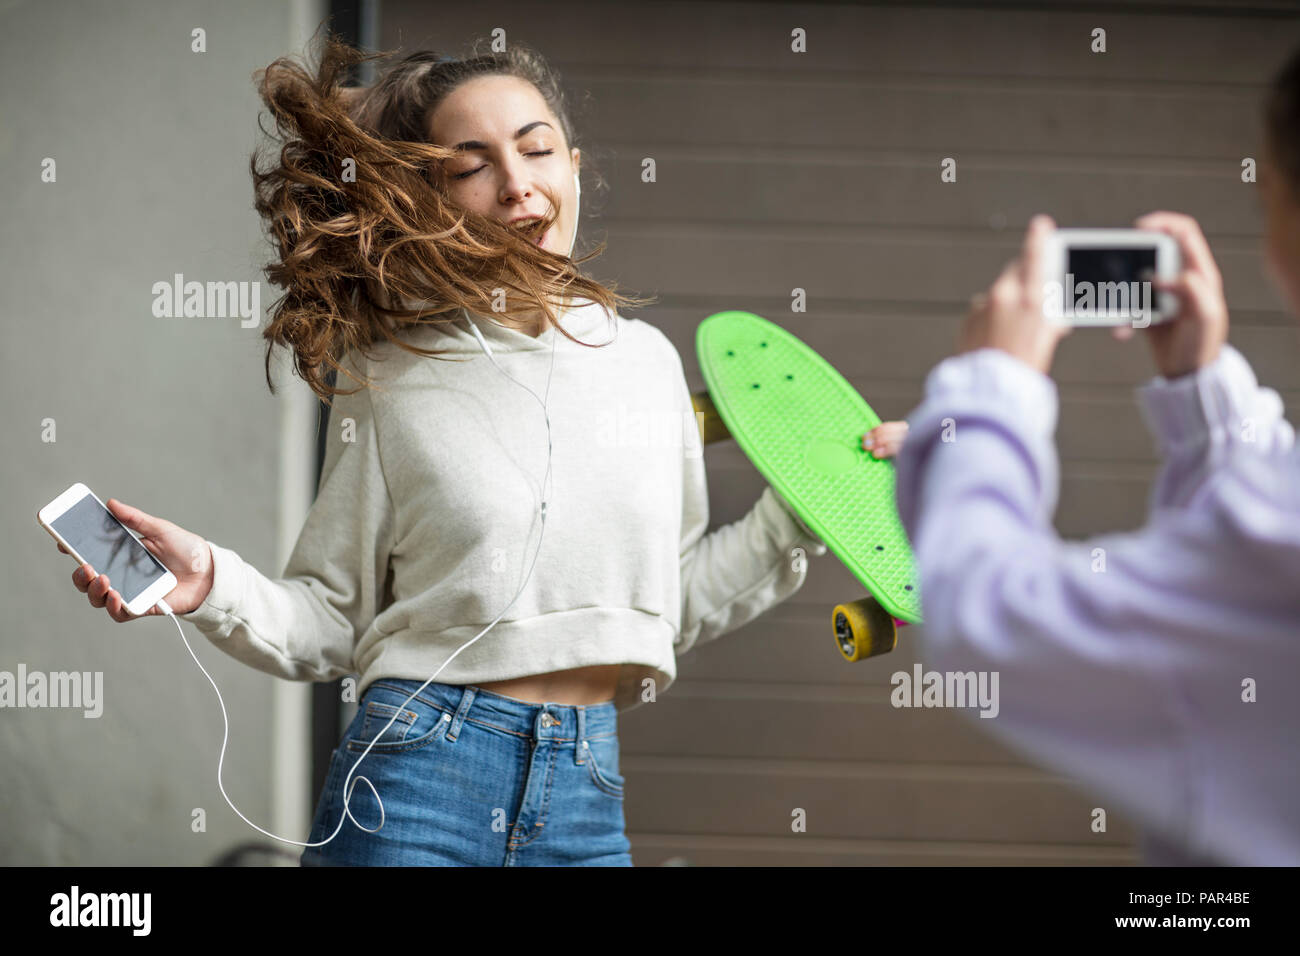 Friend taking picture of carefree teenage girl dancing while holding skateboard and listening to music Stock Photo